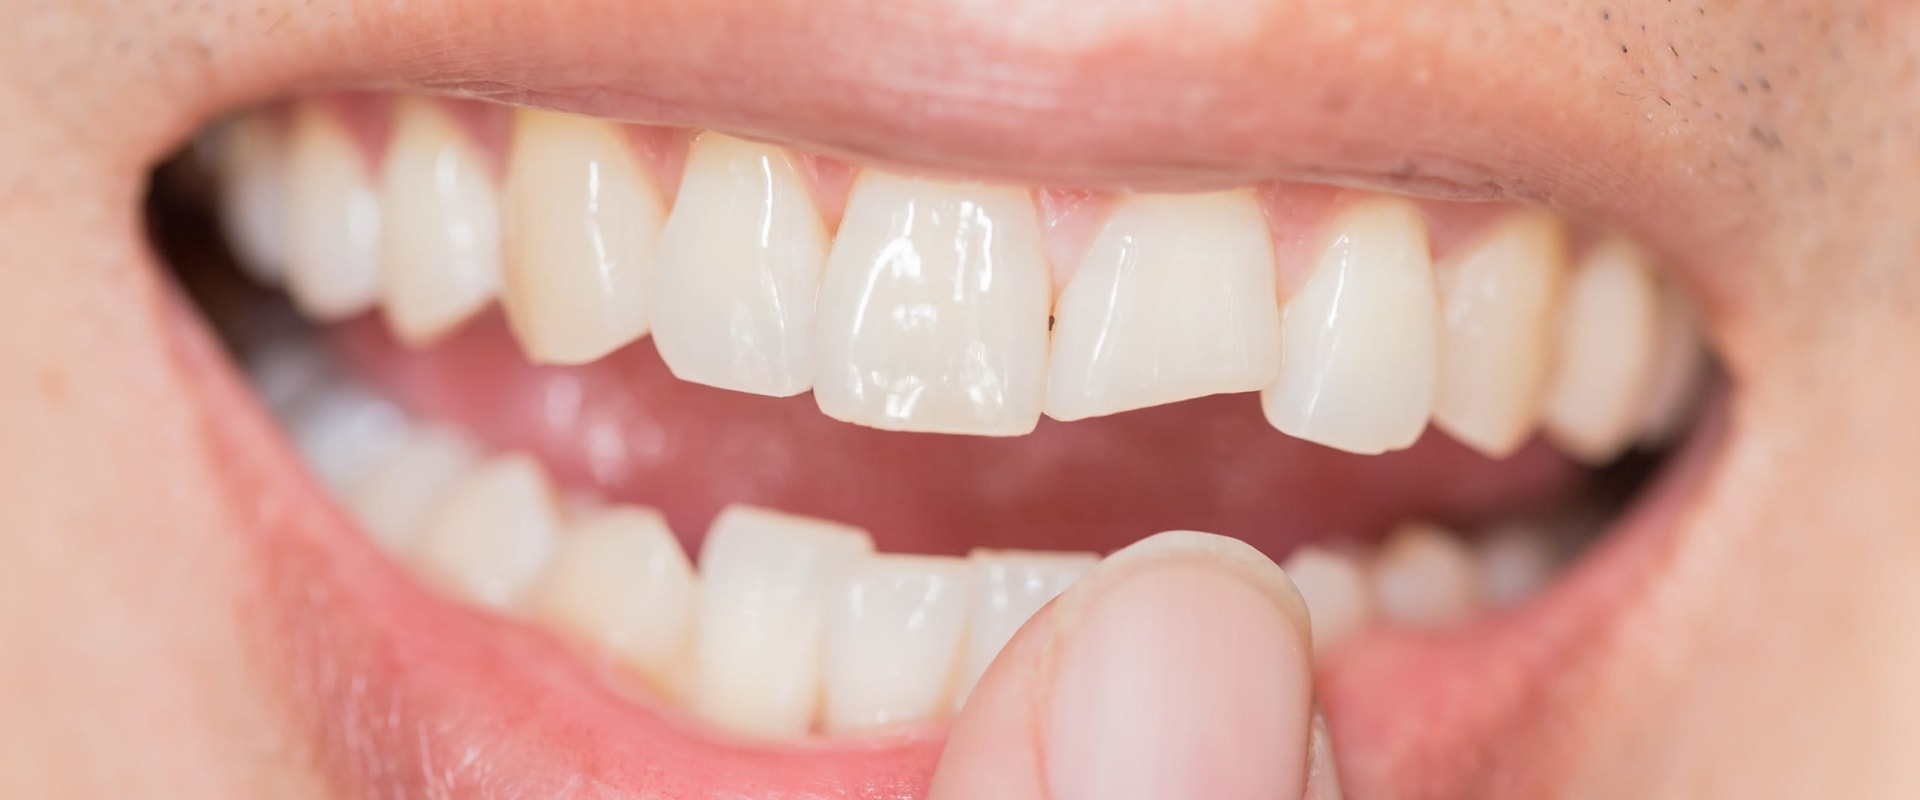 When is a Chipped Tooth an Emergency?